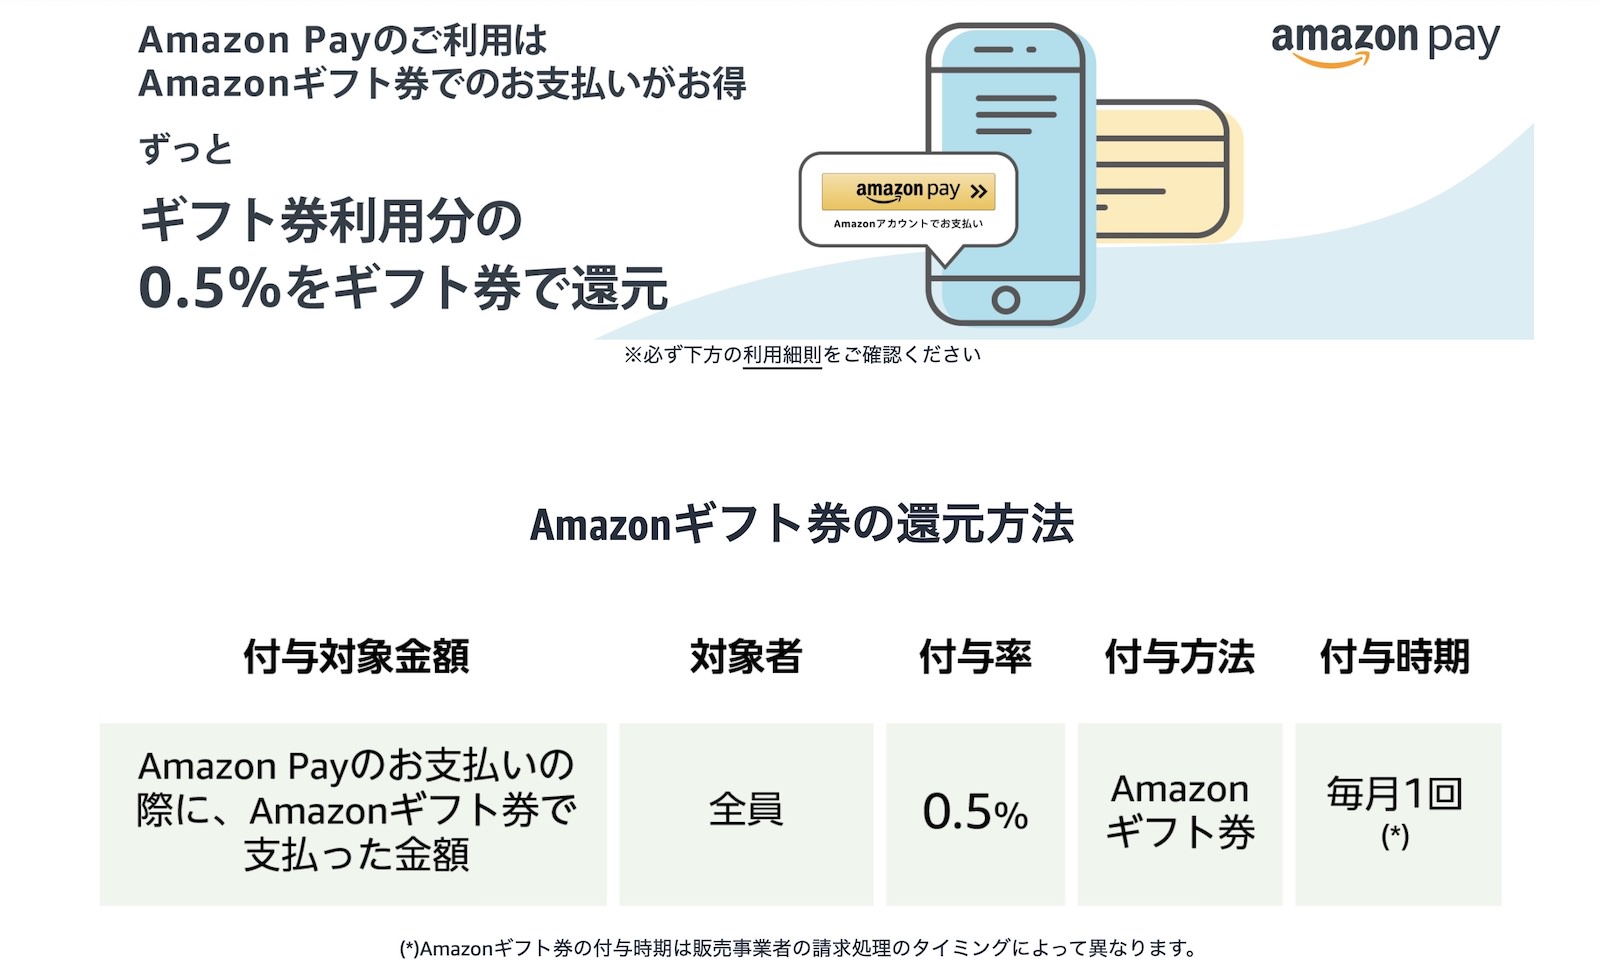 Amazon pay gift card